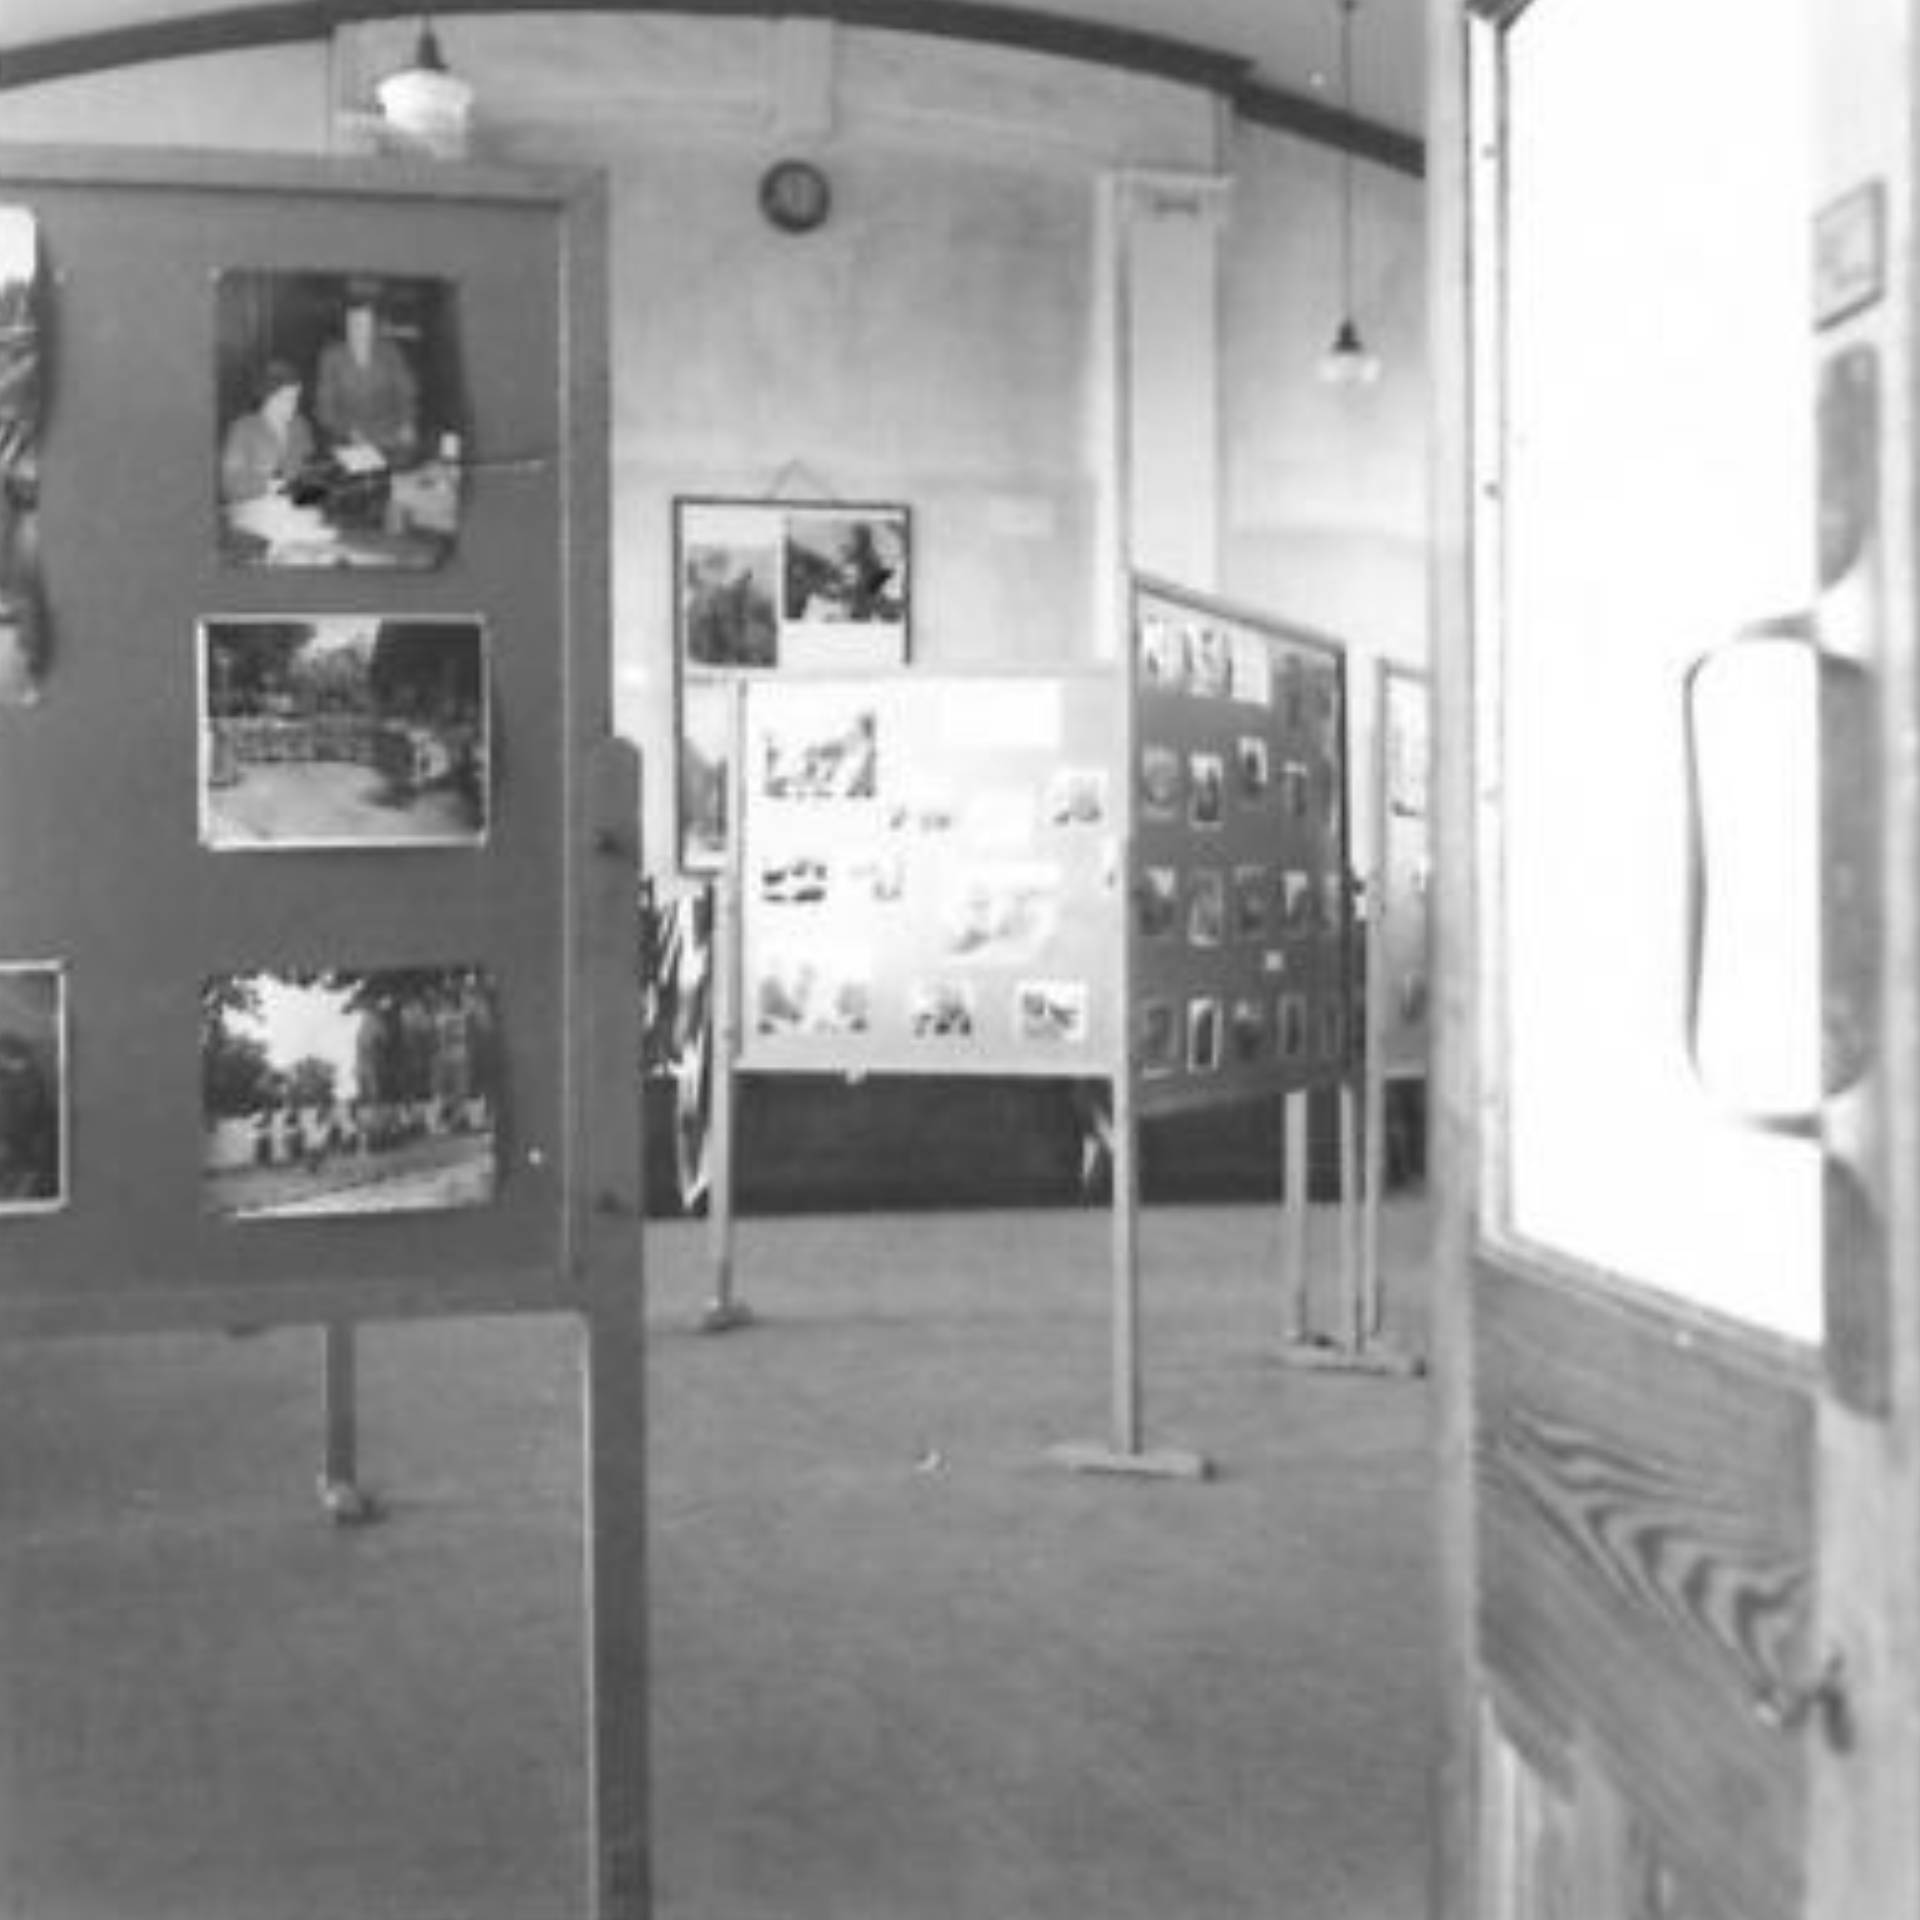 An exhibition of War Office photographs somewhere in Northern Ireland.